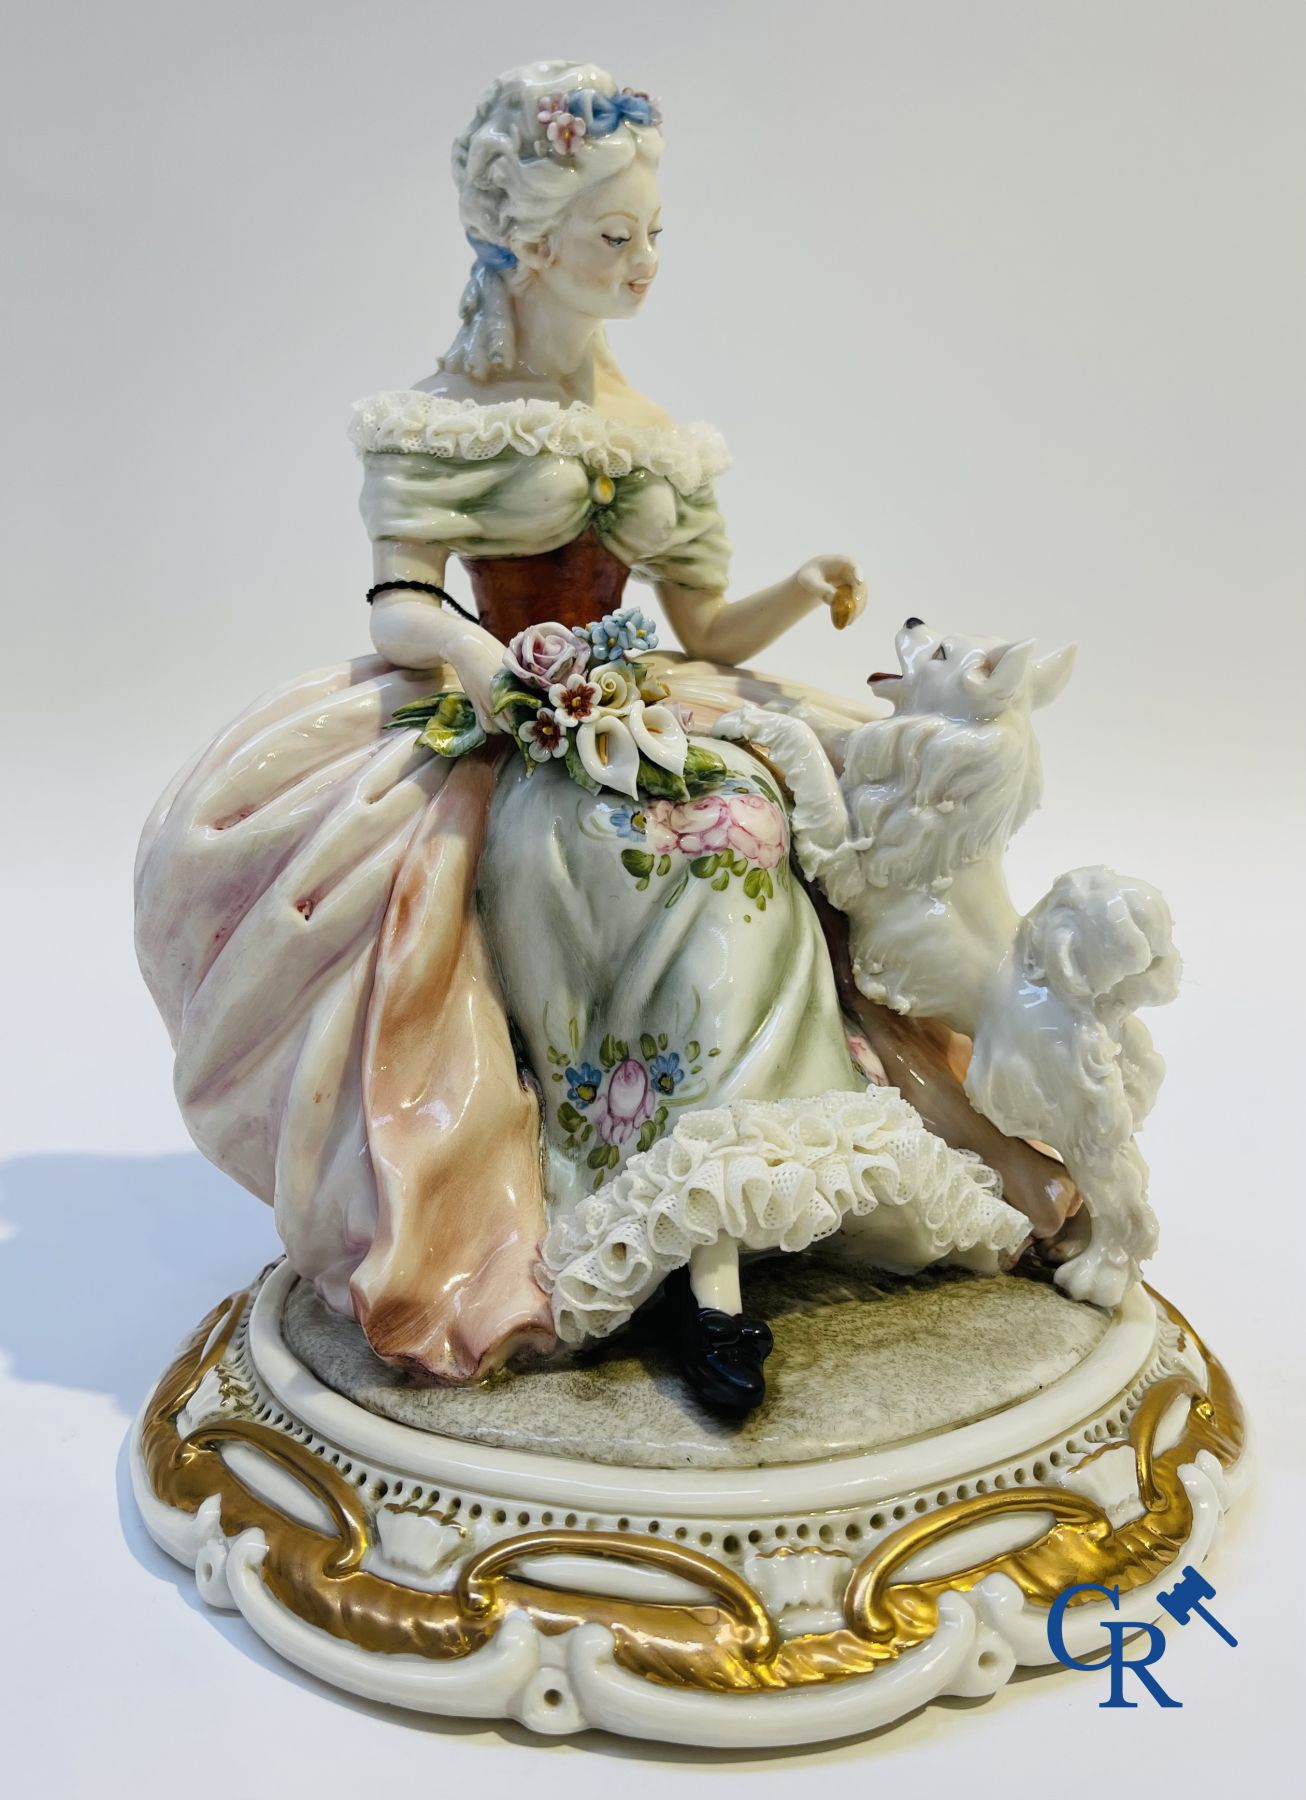 Porcelain: Capodimonte: 2 groups in Italian porcelain with lace. - Image 3 of 11